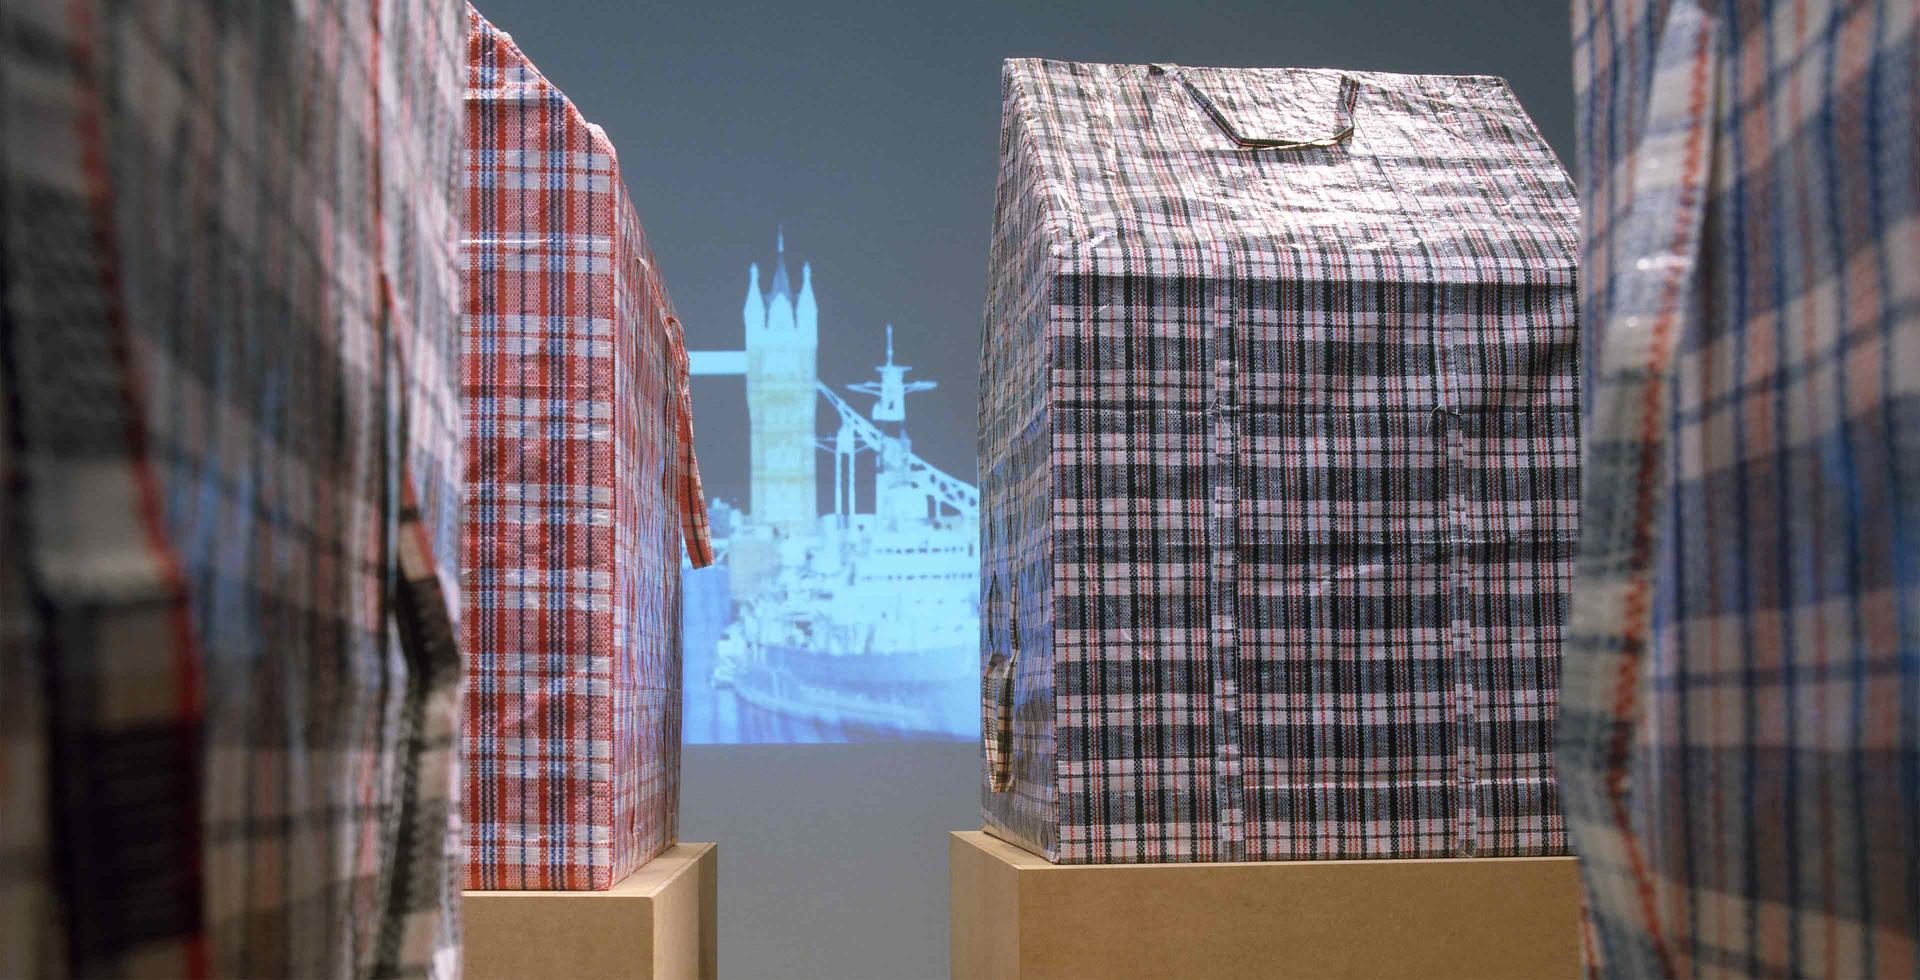 Houses made from red and white and blue checkered plastic travel bags, sitting on cardboard boxes